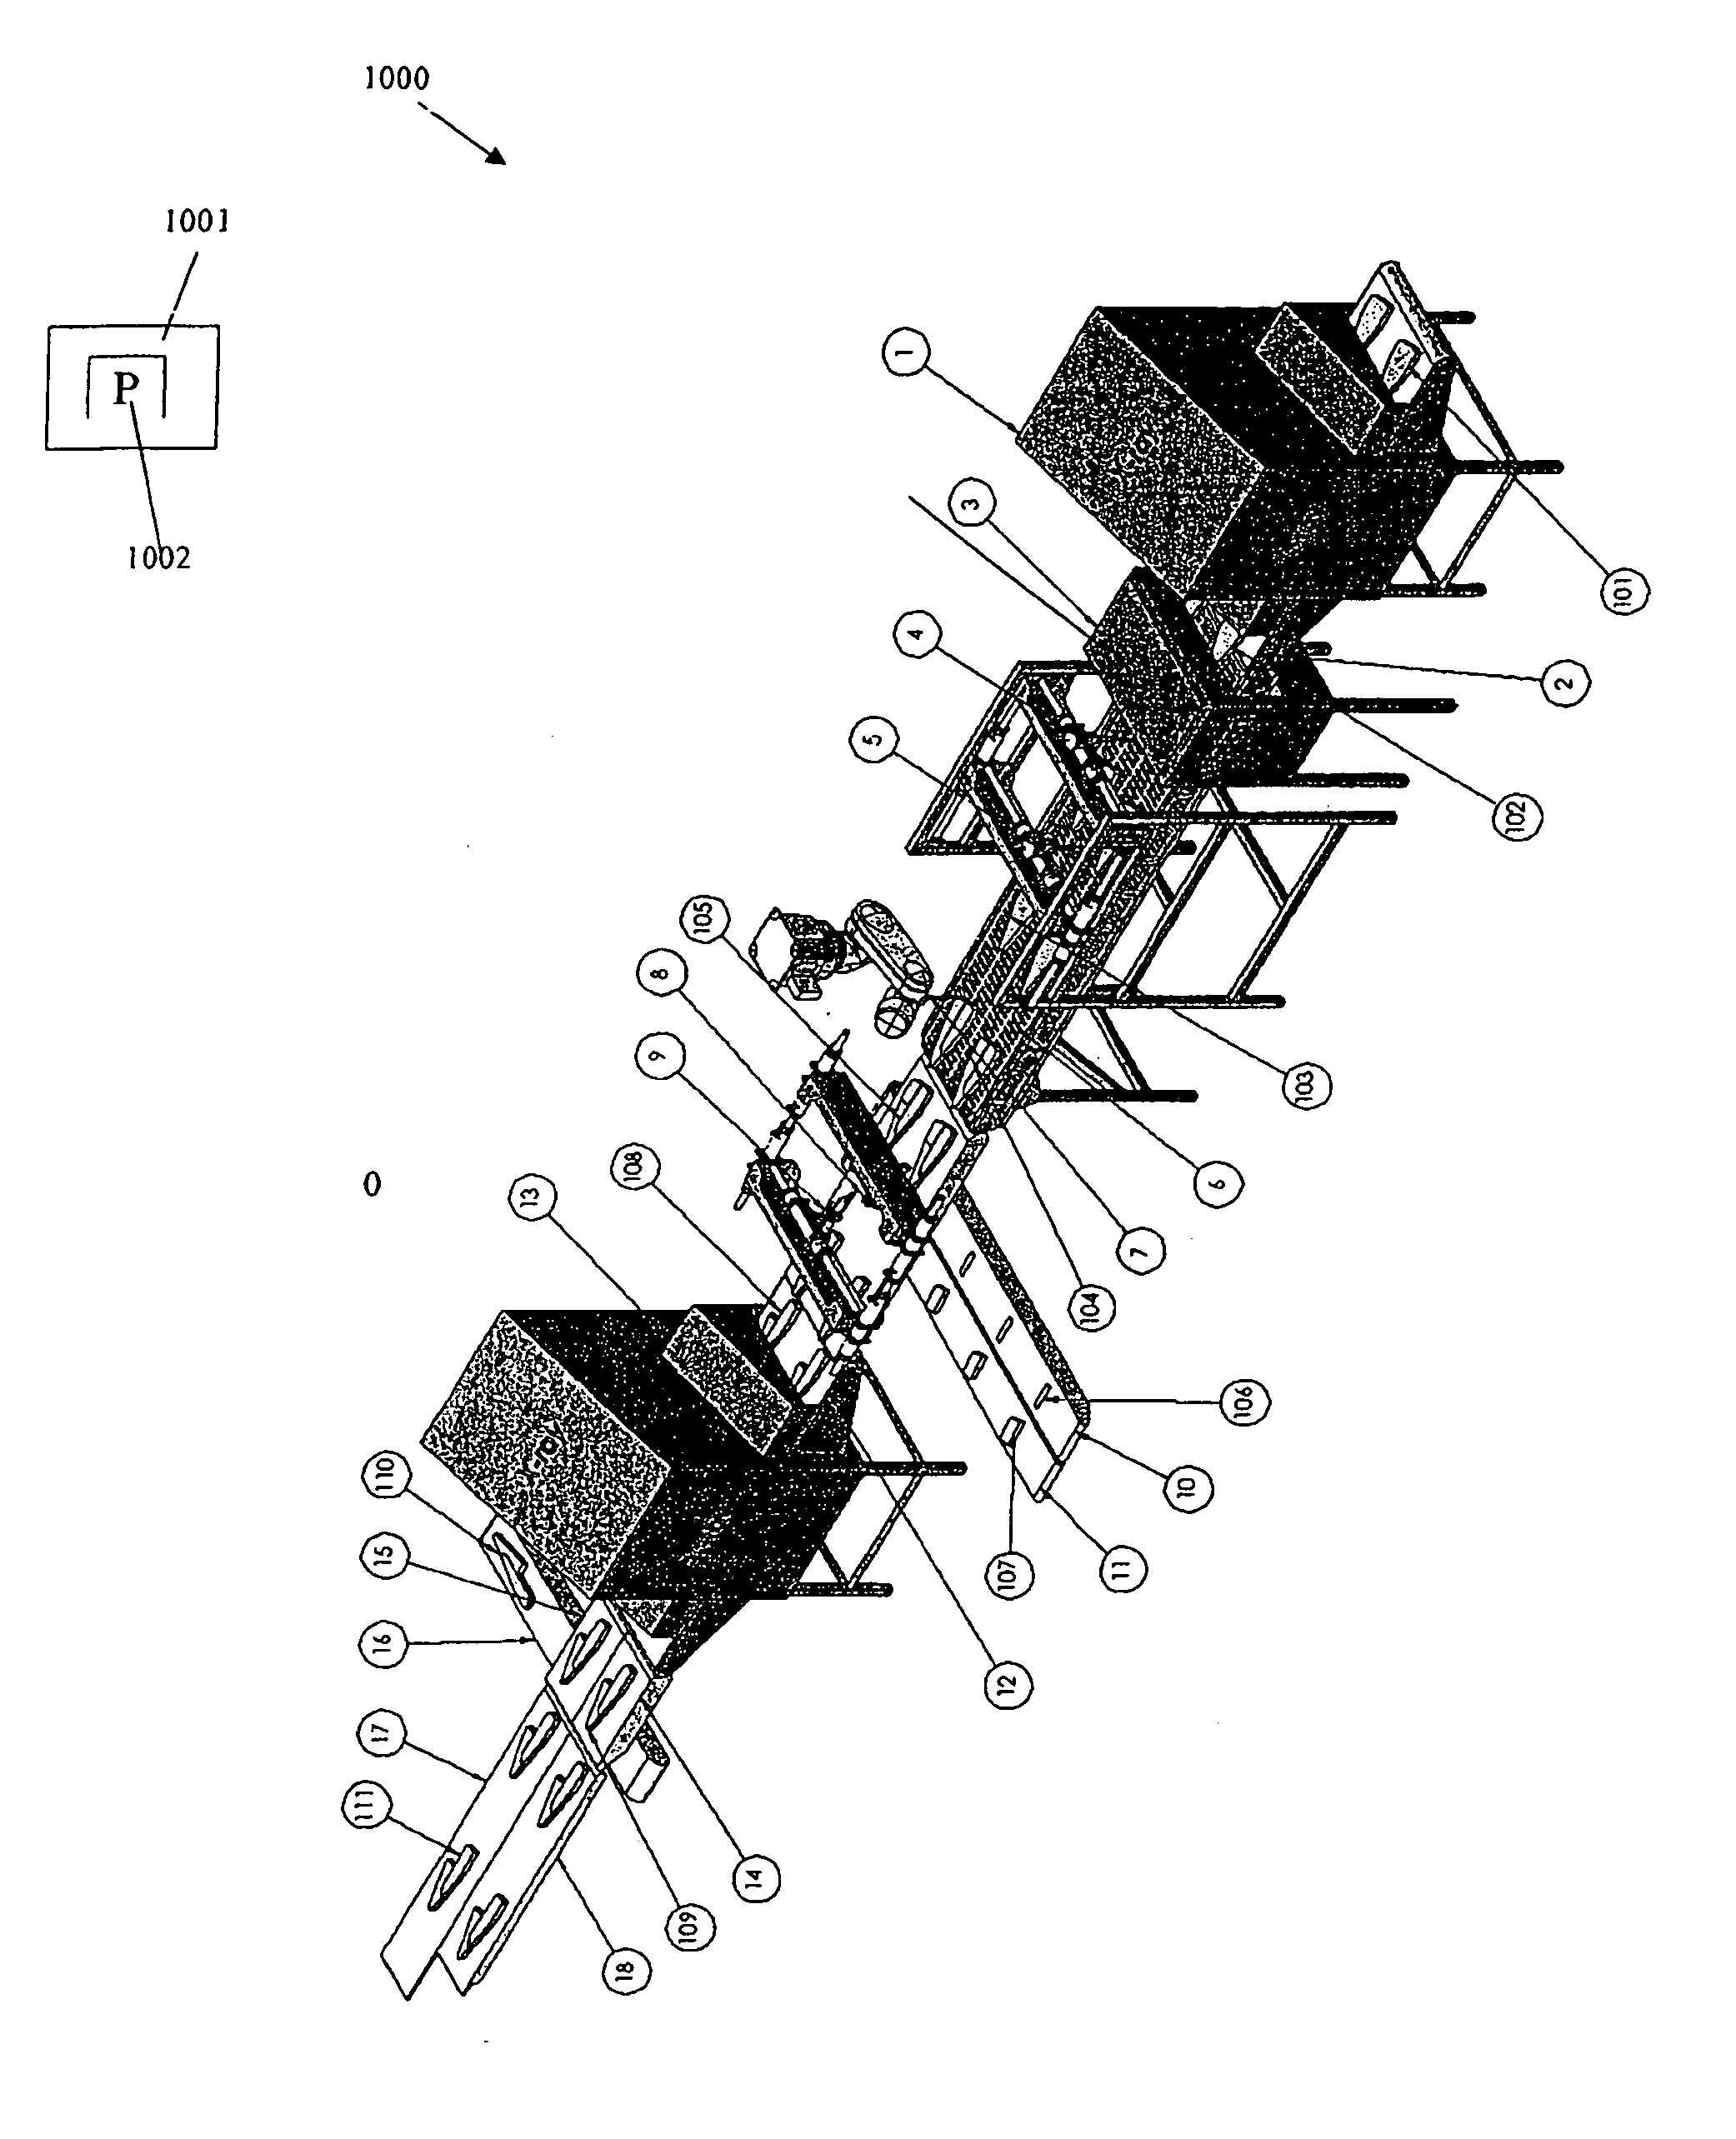 Food processing apparatus for detecting and cutting tough tissues from food items